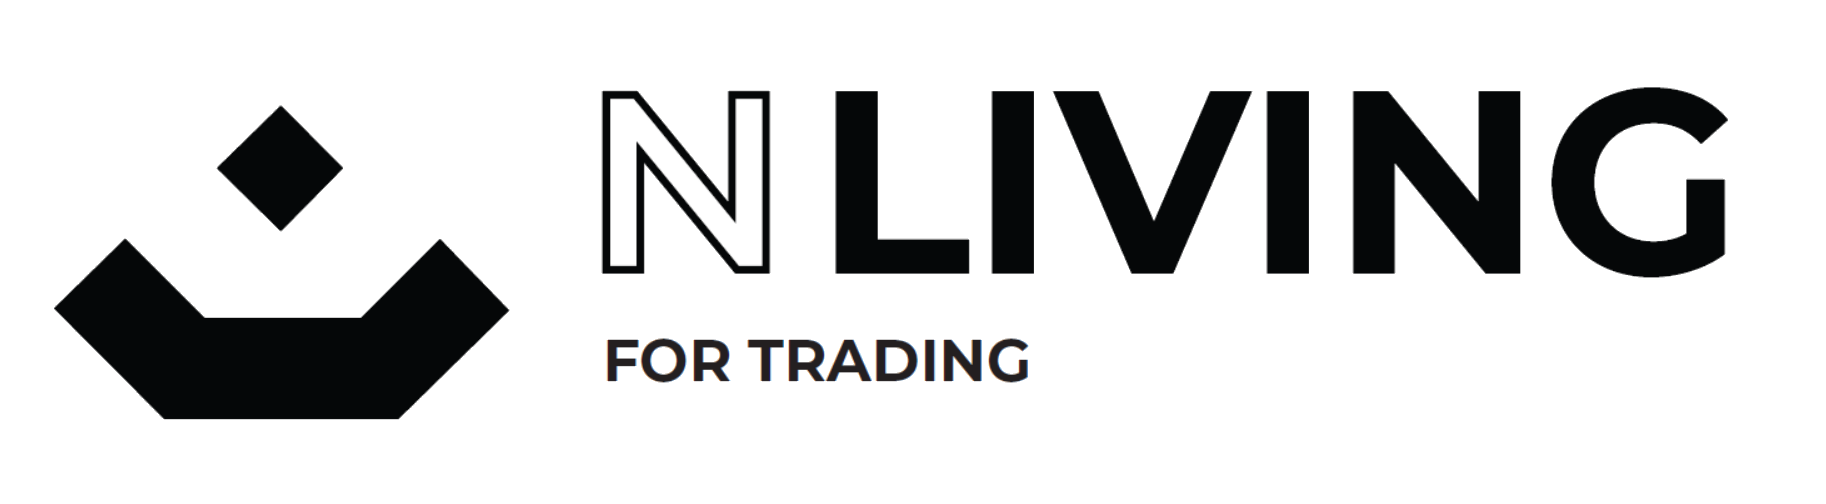 Nliving trading